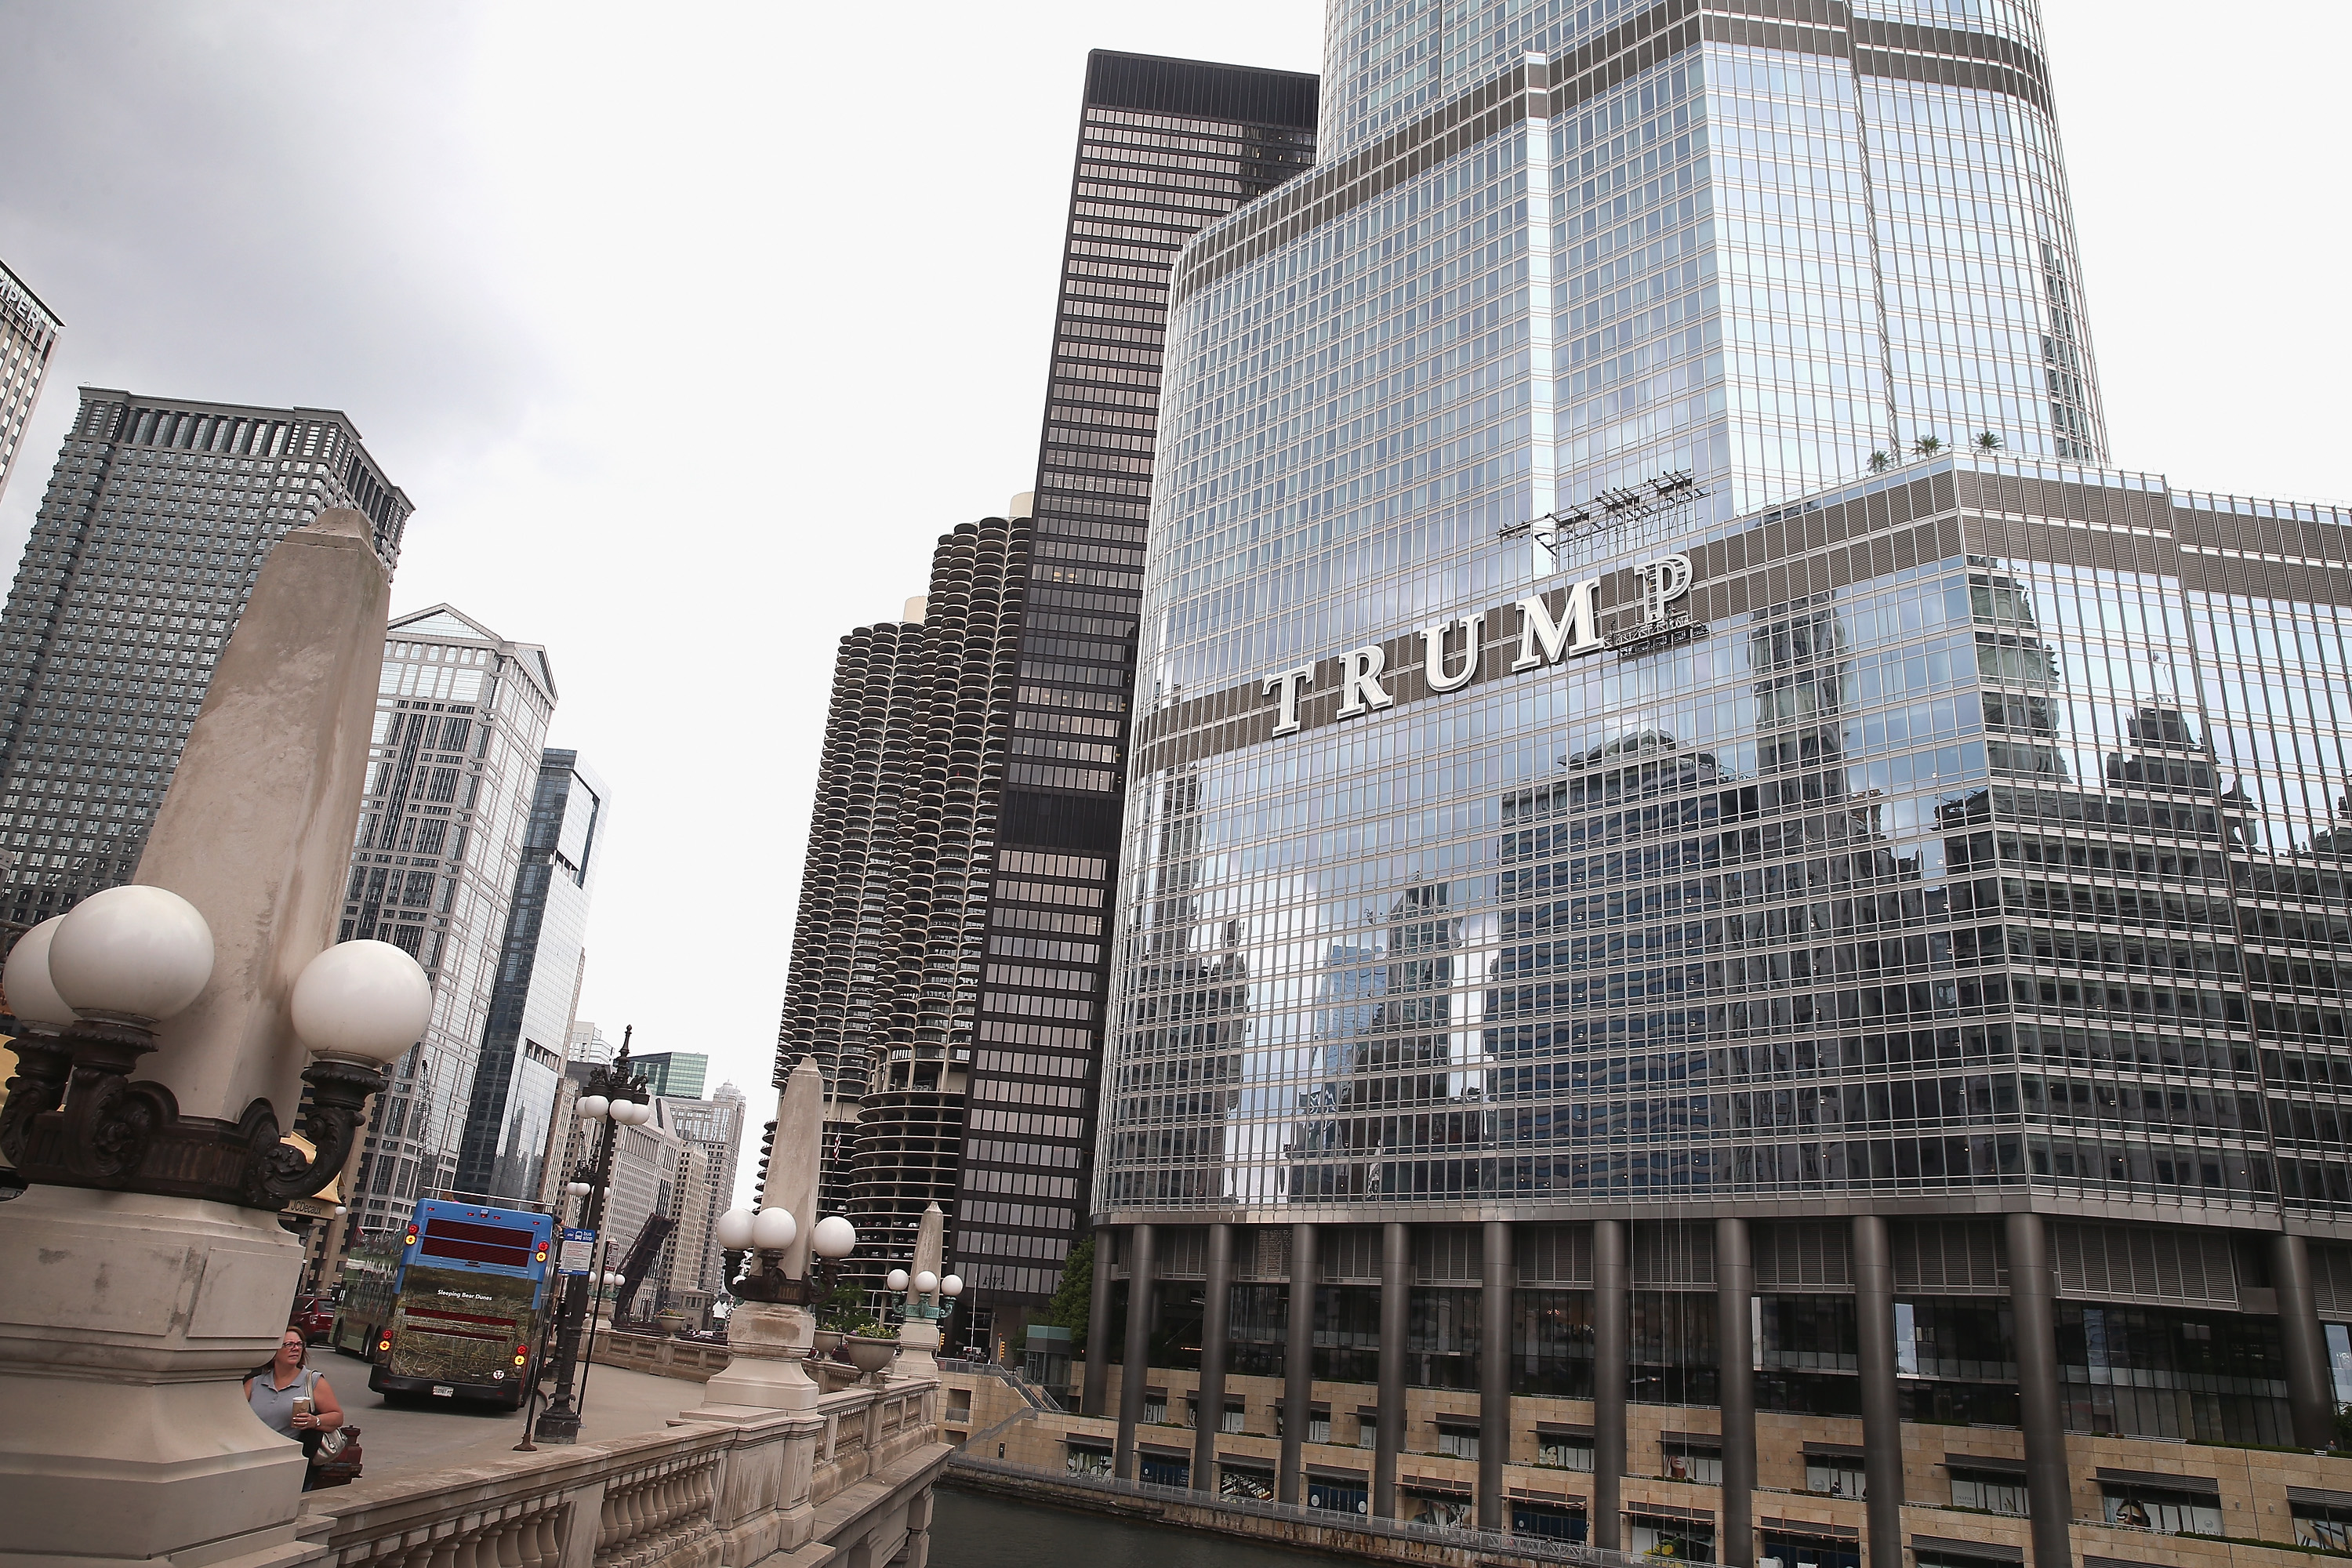 Large Trump Sign On Trump Building In Chicago Draws Ire Of Many In City